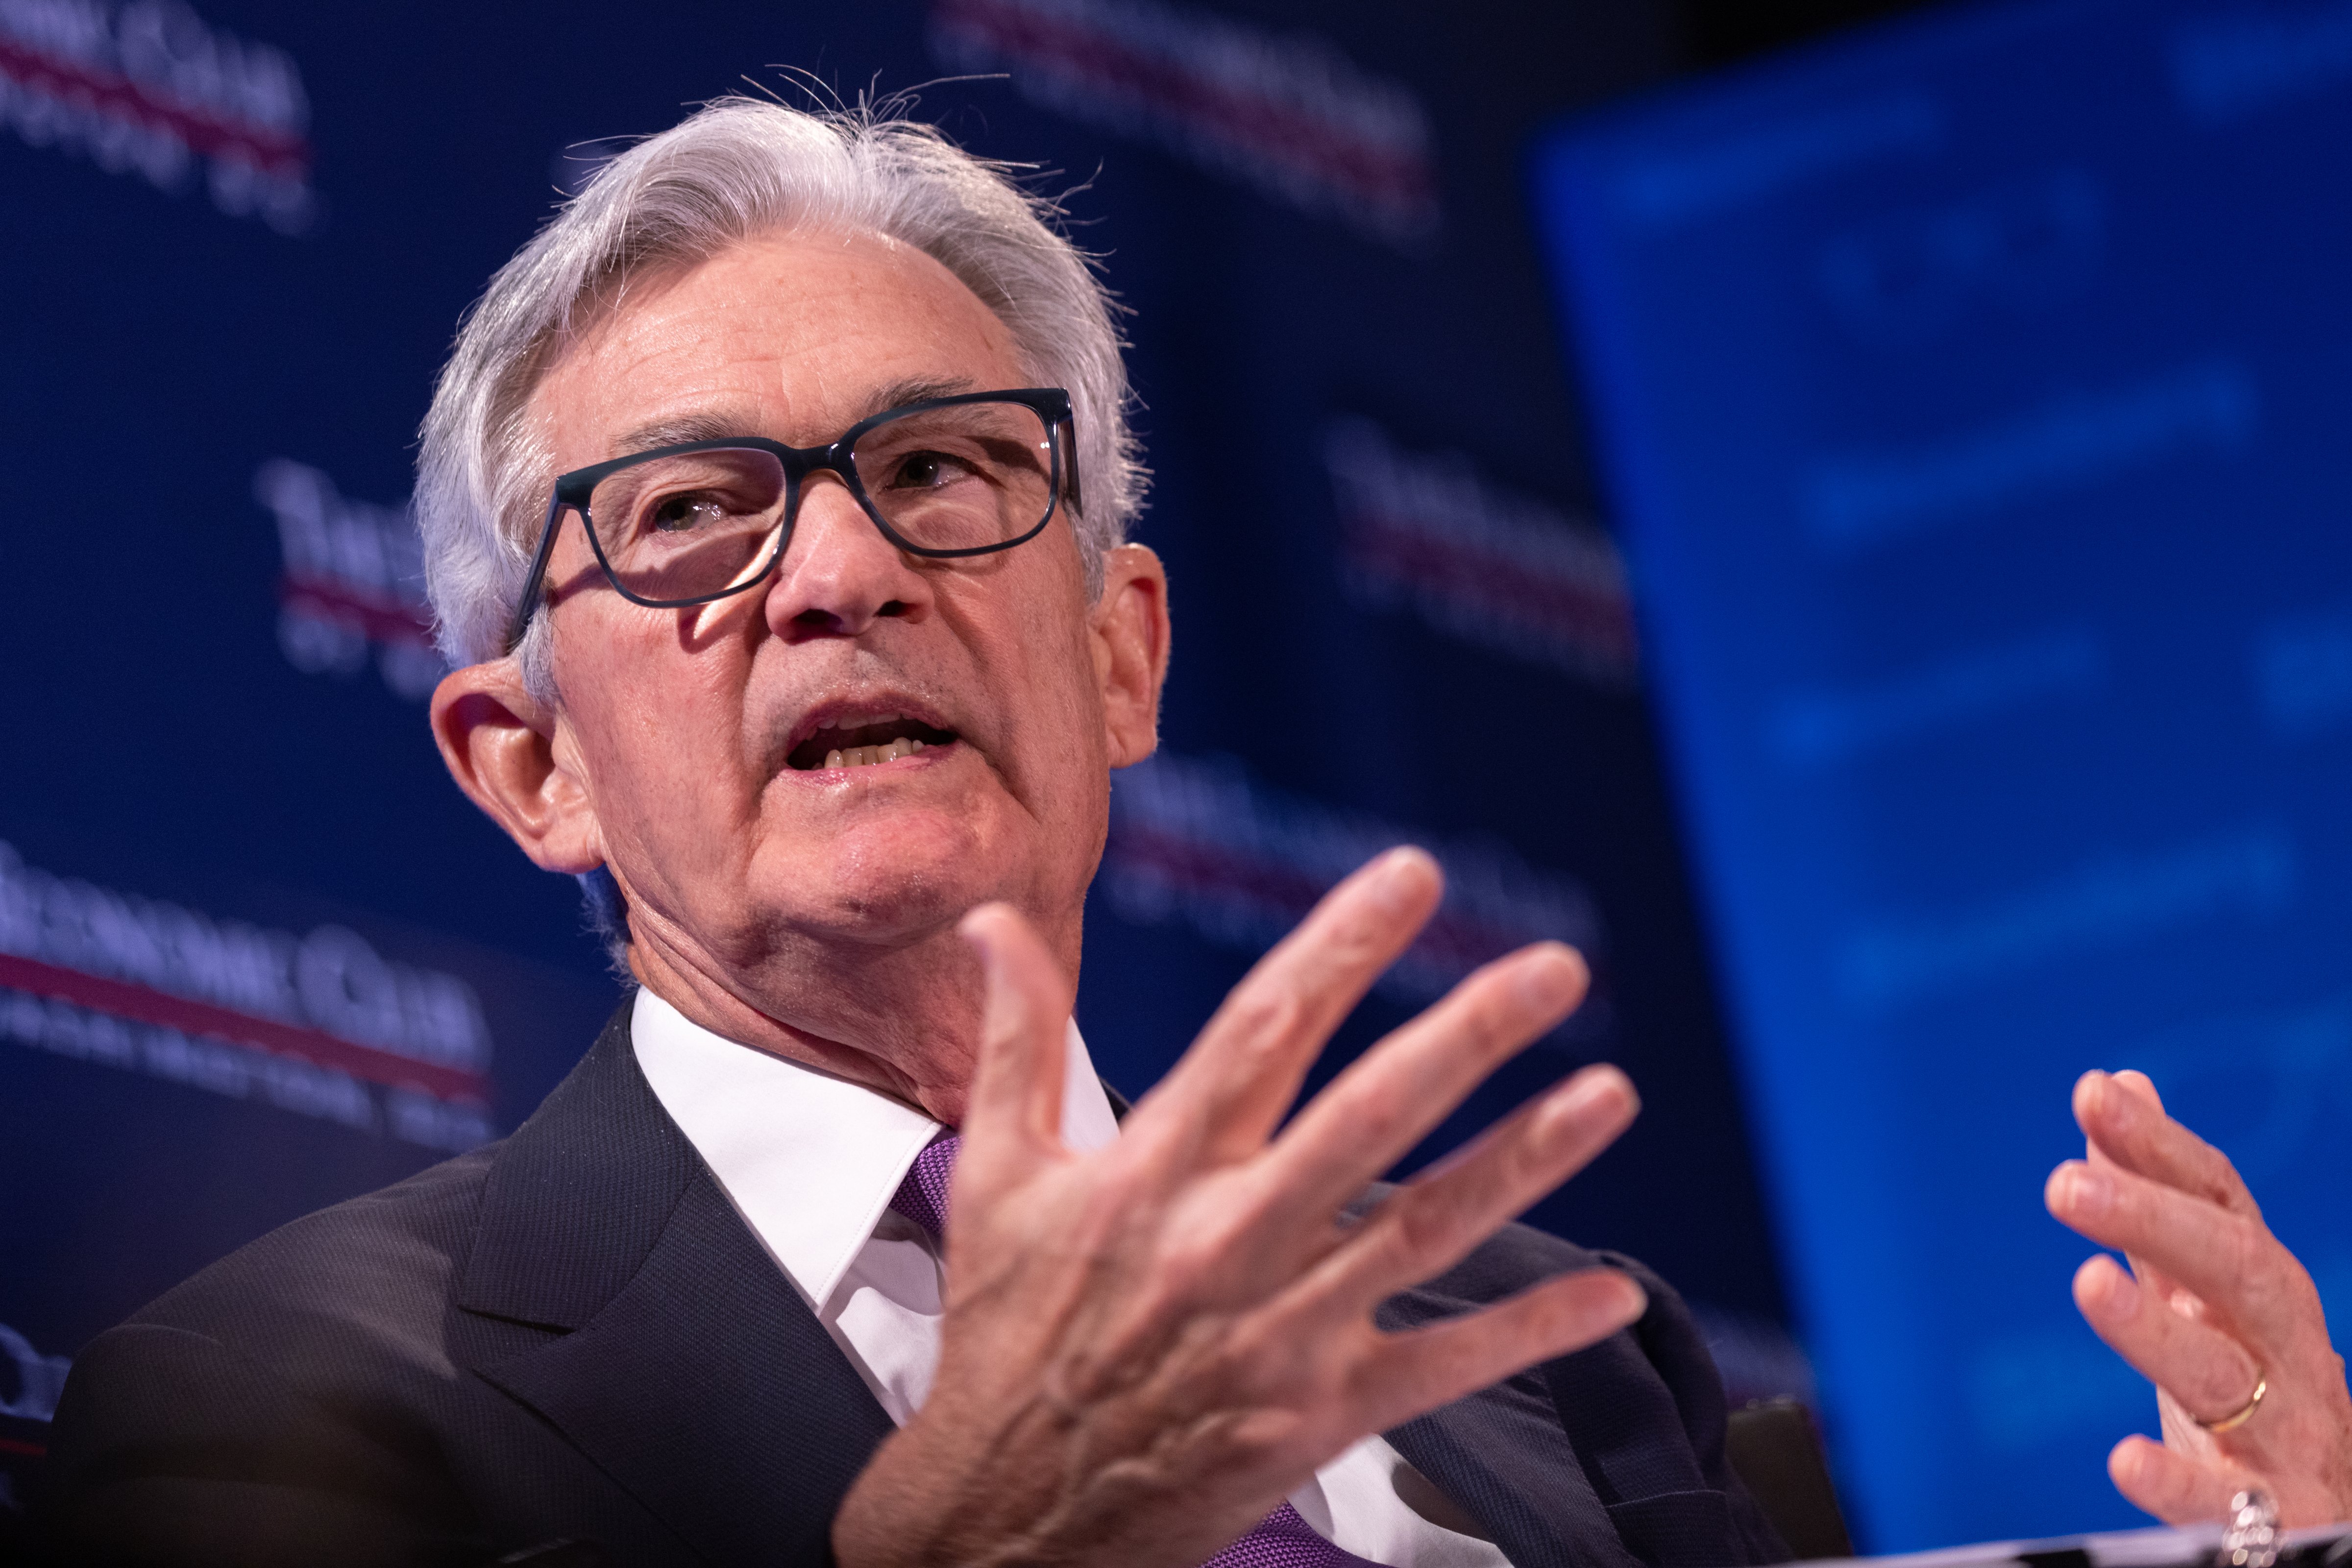 Federal Reserve Board Chairman Jerome Powell speaks during an interview by David Rubenstein, Chairman of the Economic Club of Washington, D.C., at the Renaissance Hotel on February 7, 2023 in Washington, DC. (Julia Nikhinson–Getty Images)